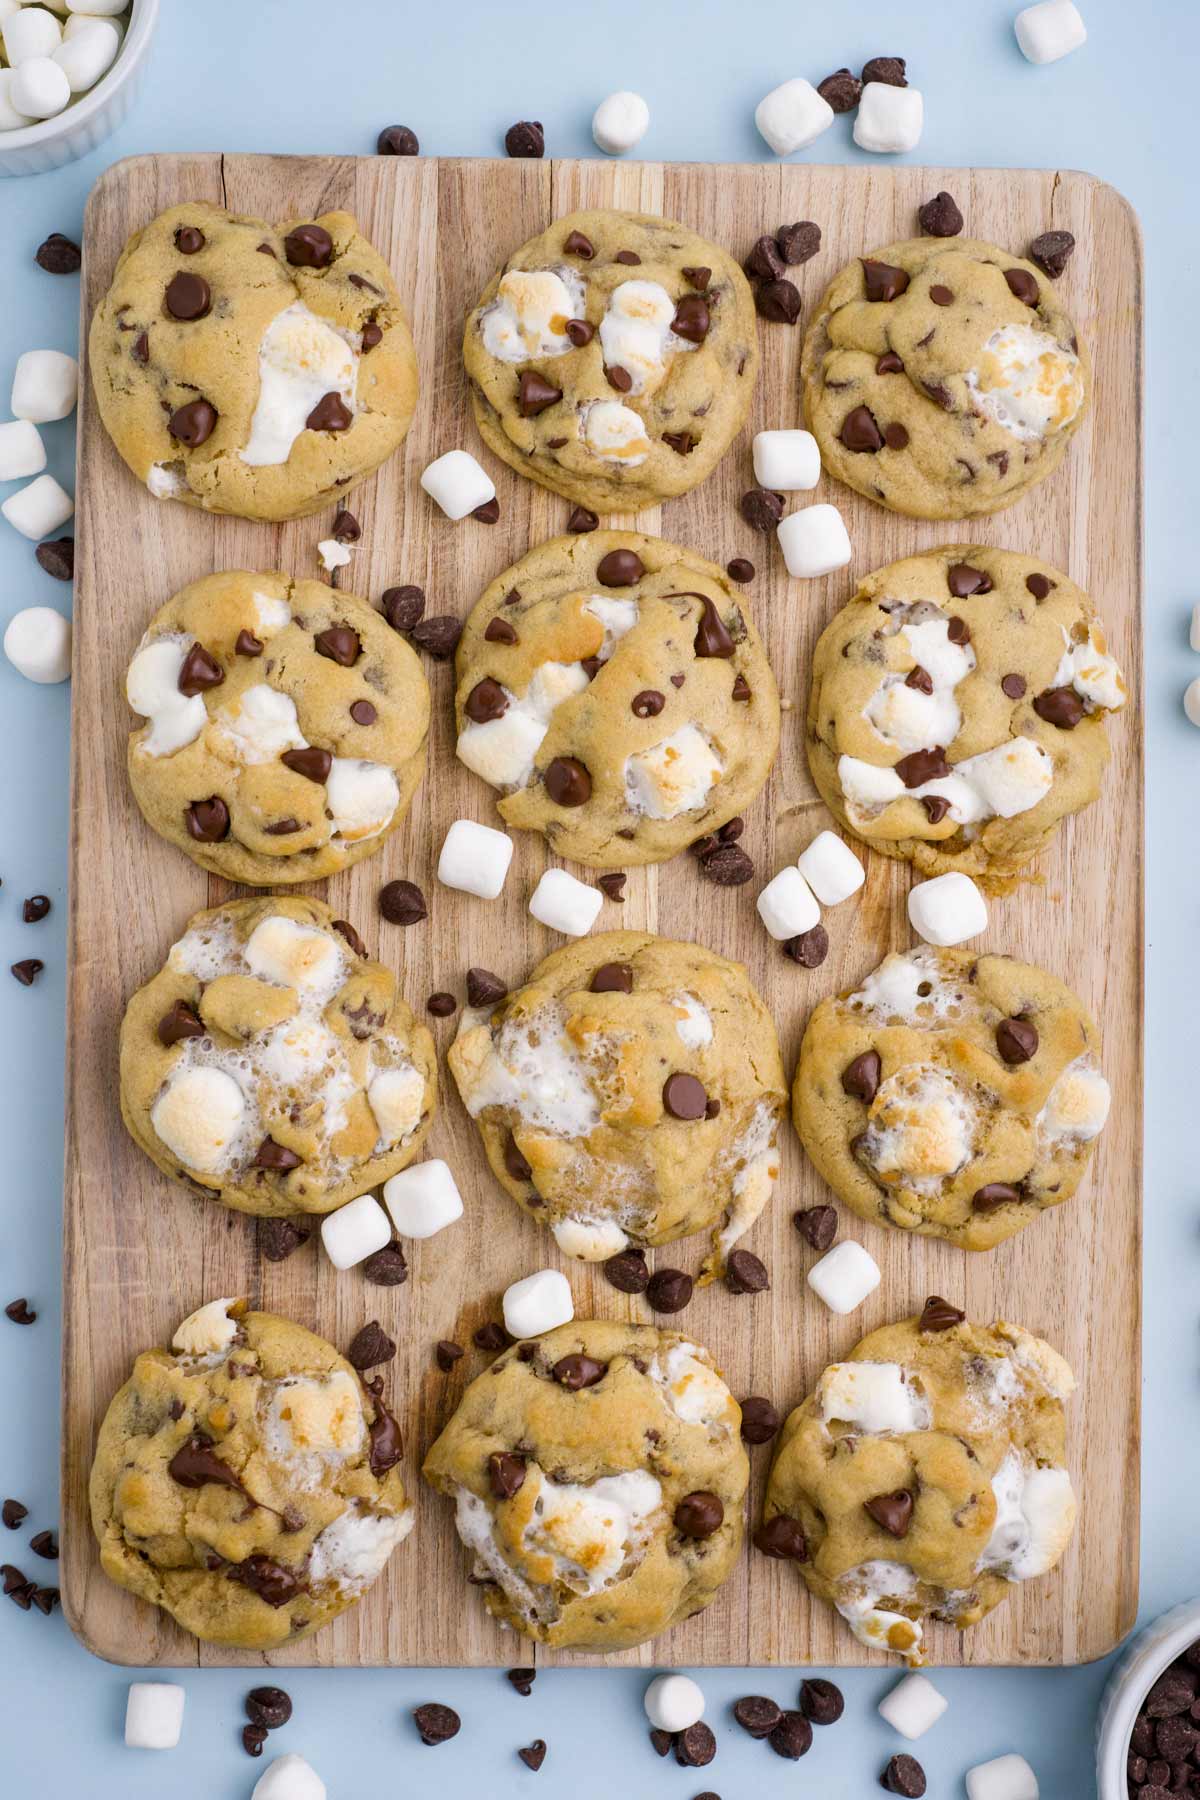 Cookies laid out flat on a cutting board with marshmallows and chocolate chips sprinkled around.